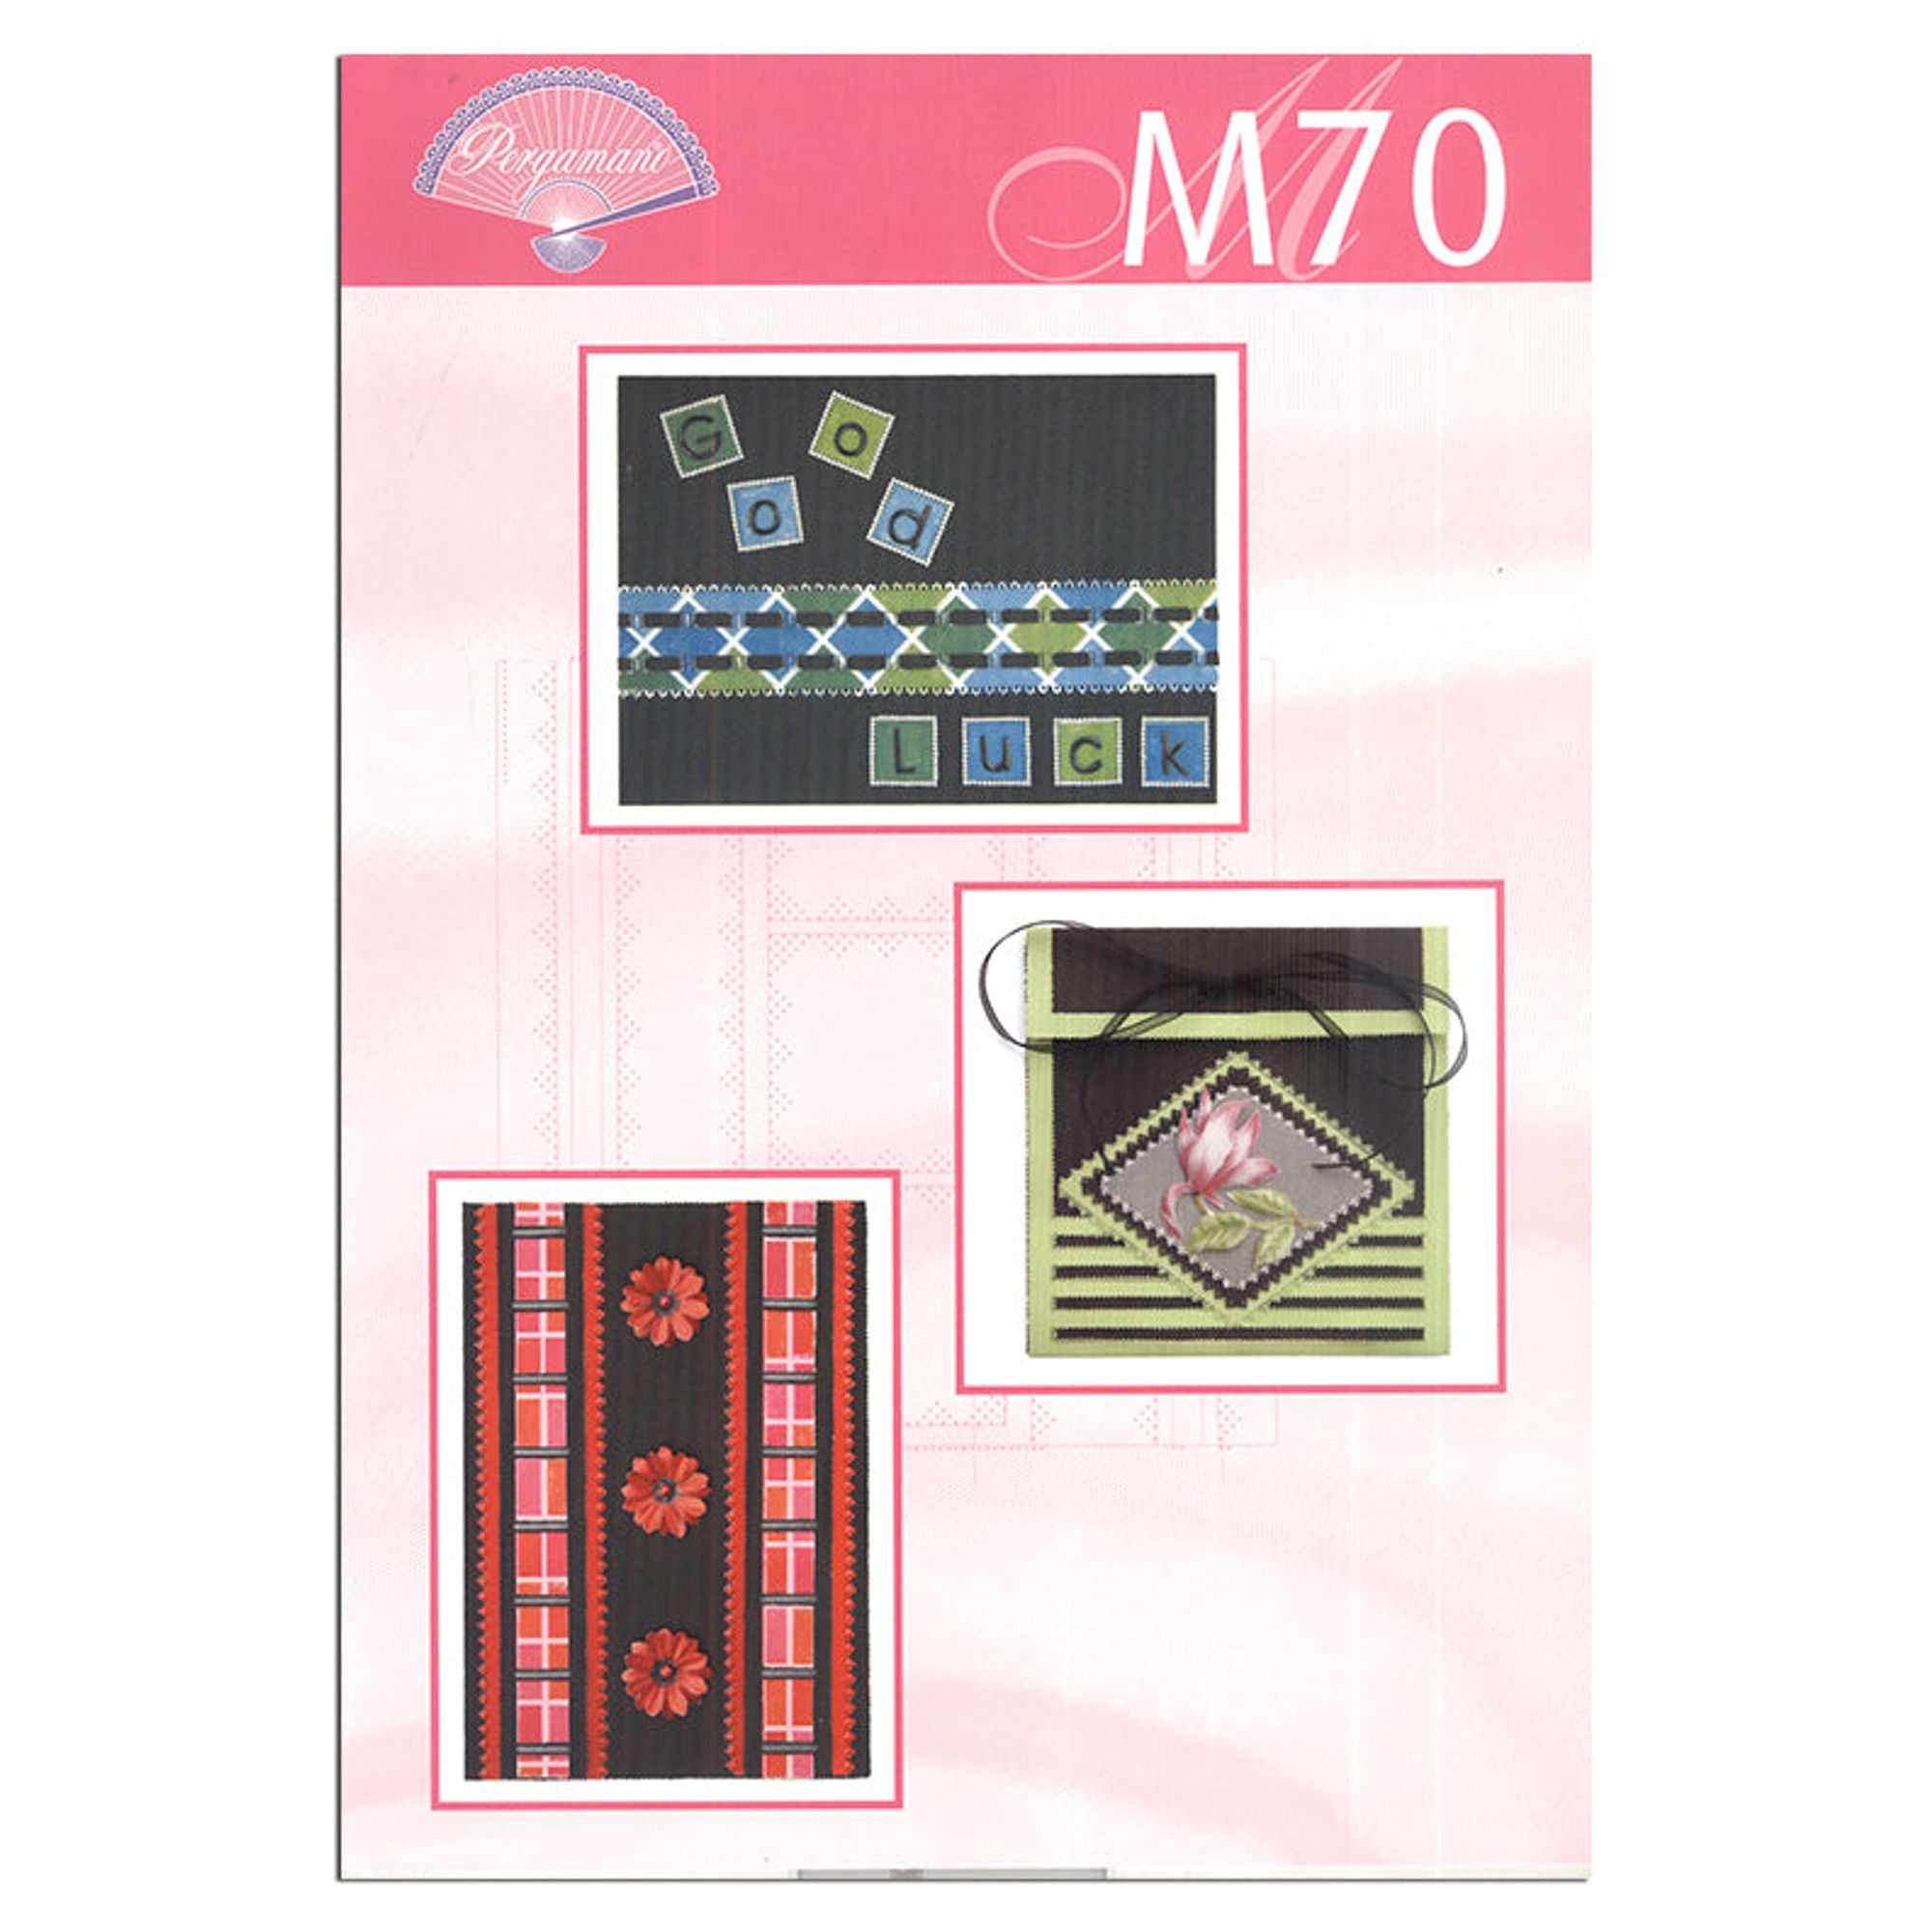 Pergamano Pattern Booklet M70 Colorful Black